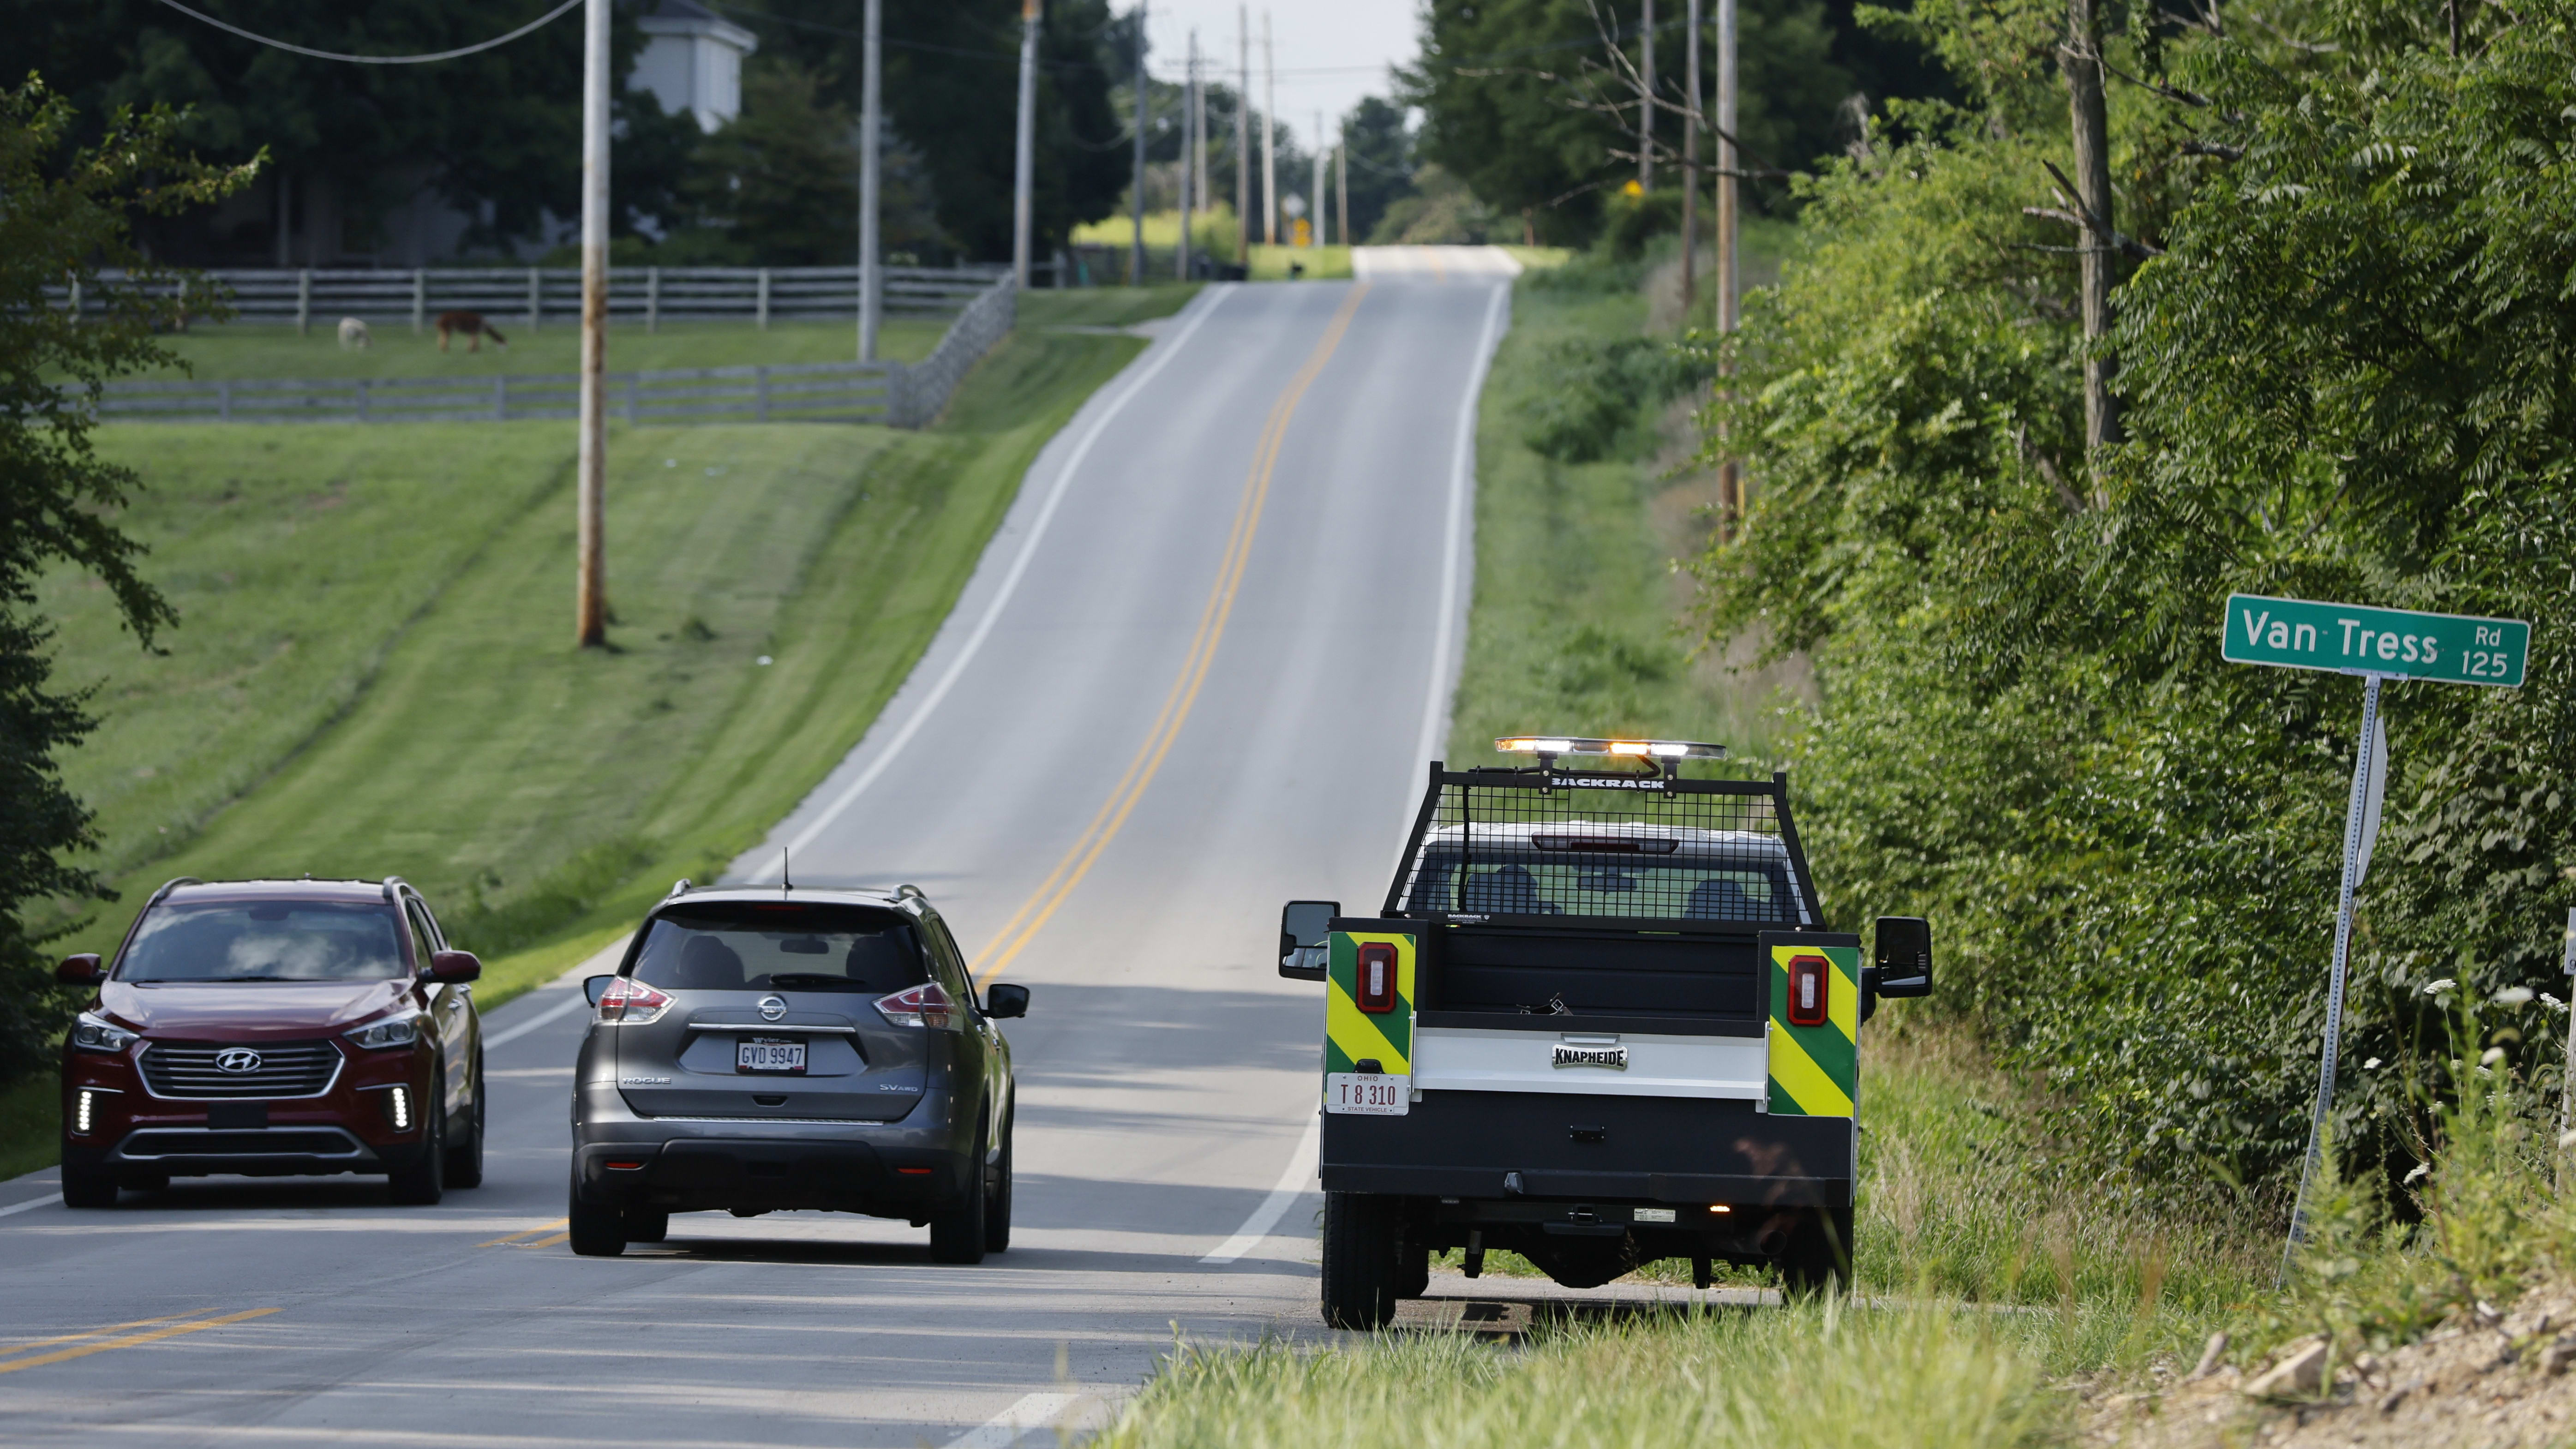 Law enforcement near the site of a shooting in Clinton County, Ohio.